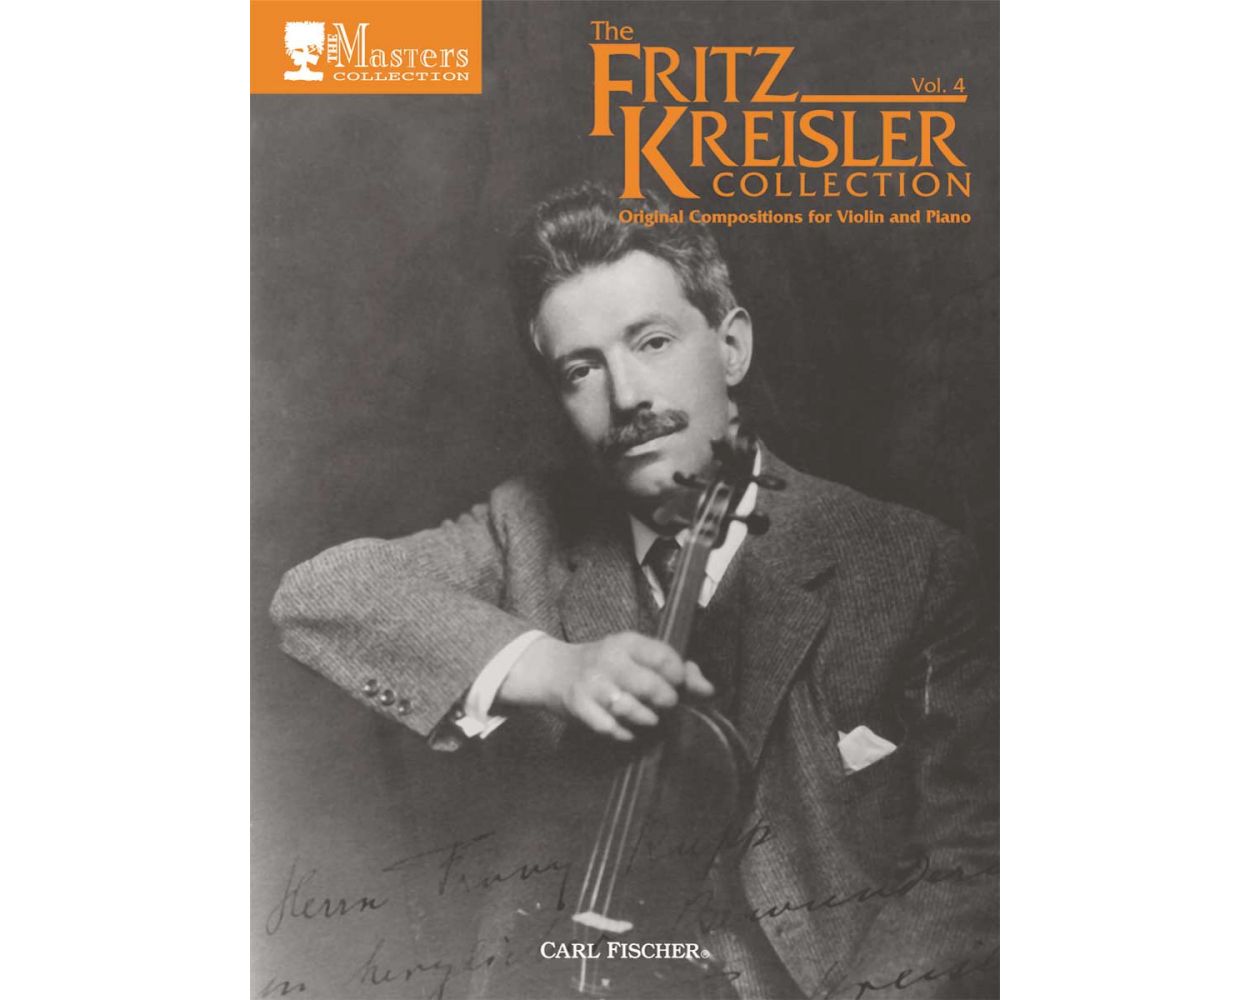 The Fritz Kreisler Collection Volume 4 Original Compositions for Violin and Piano